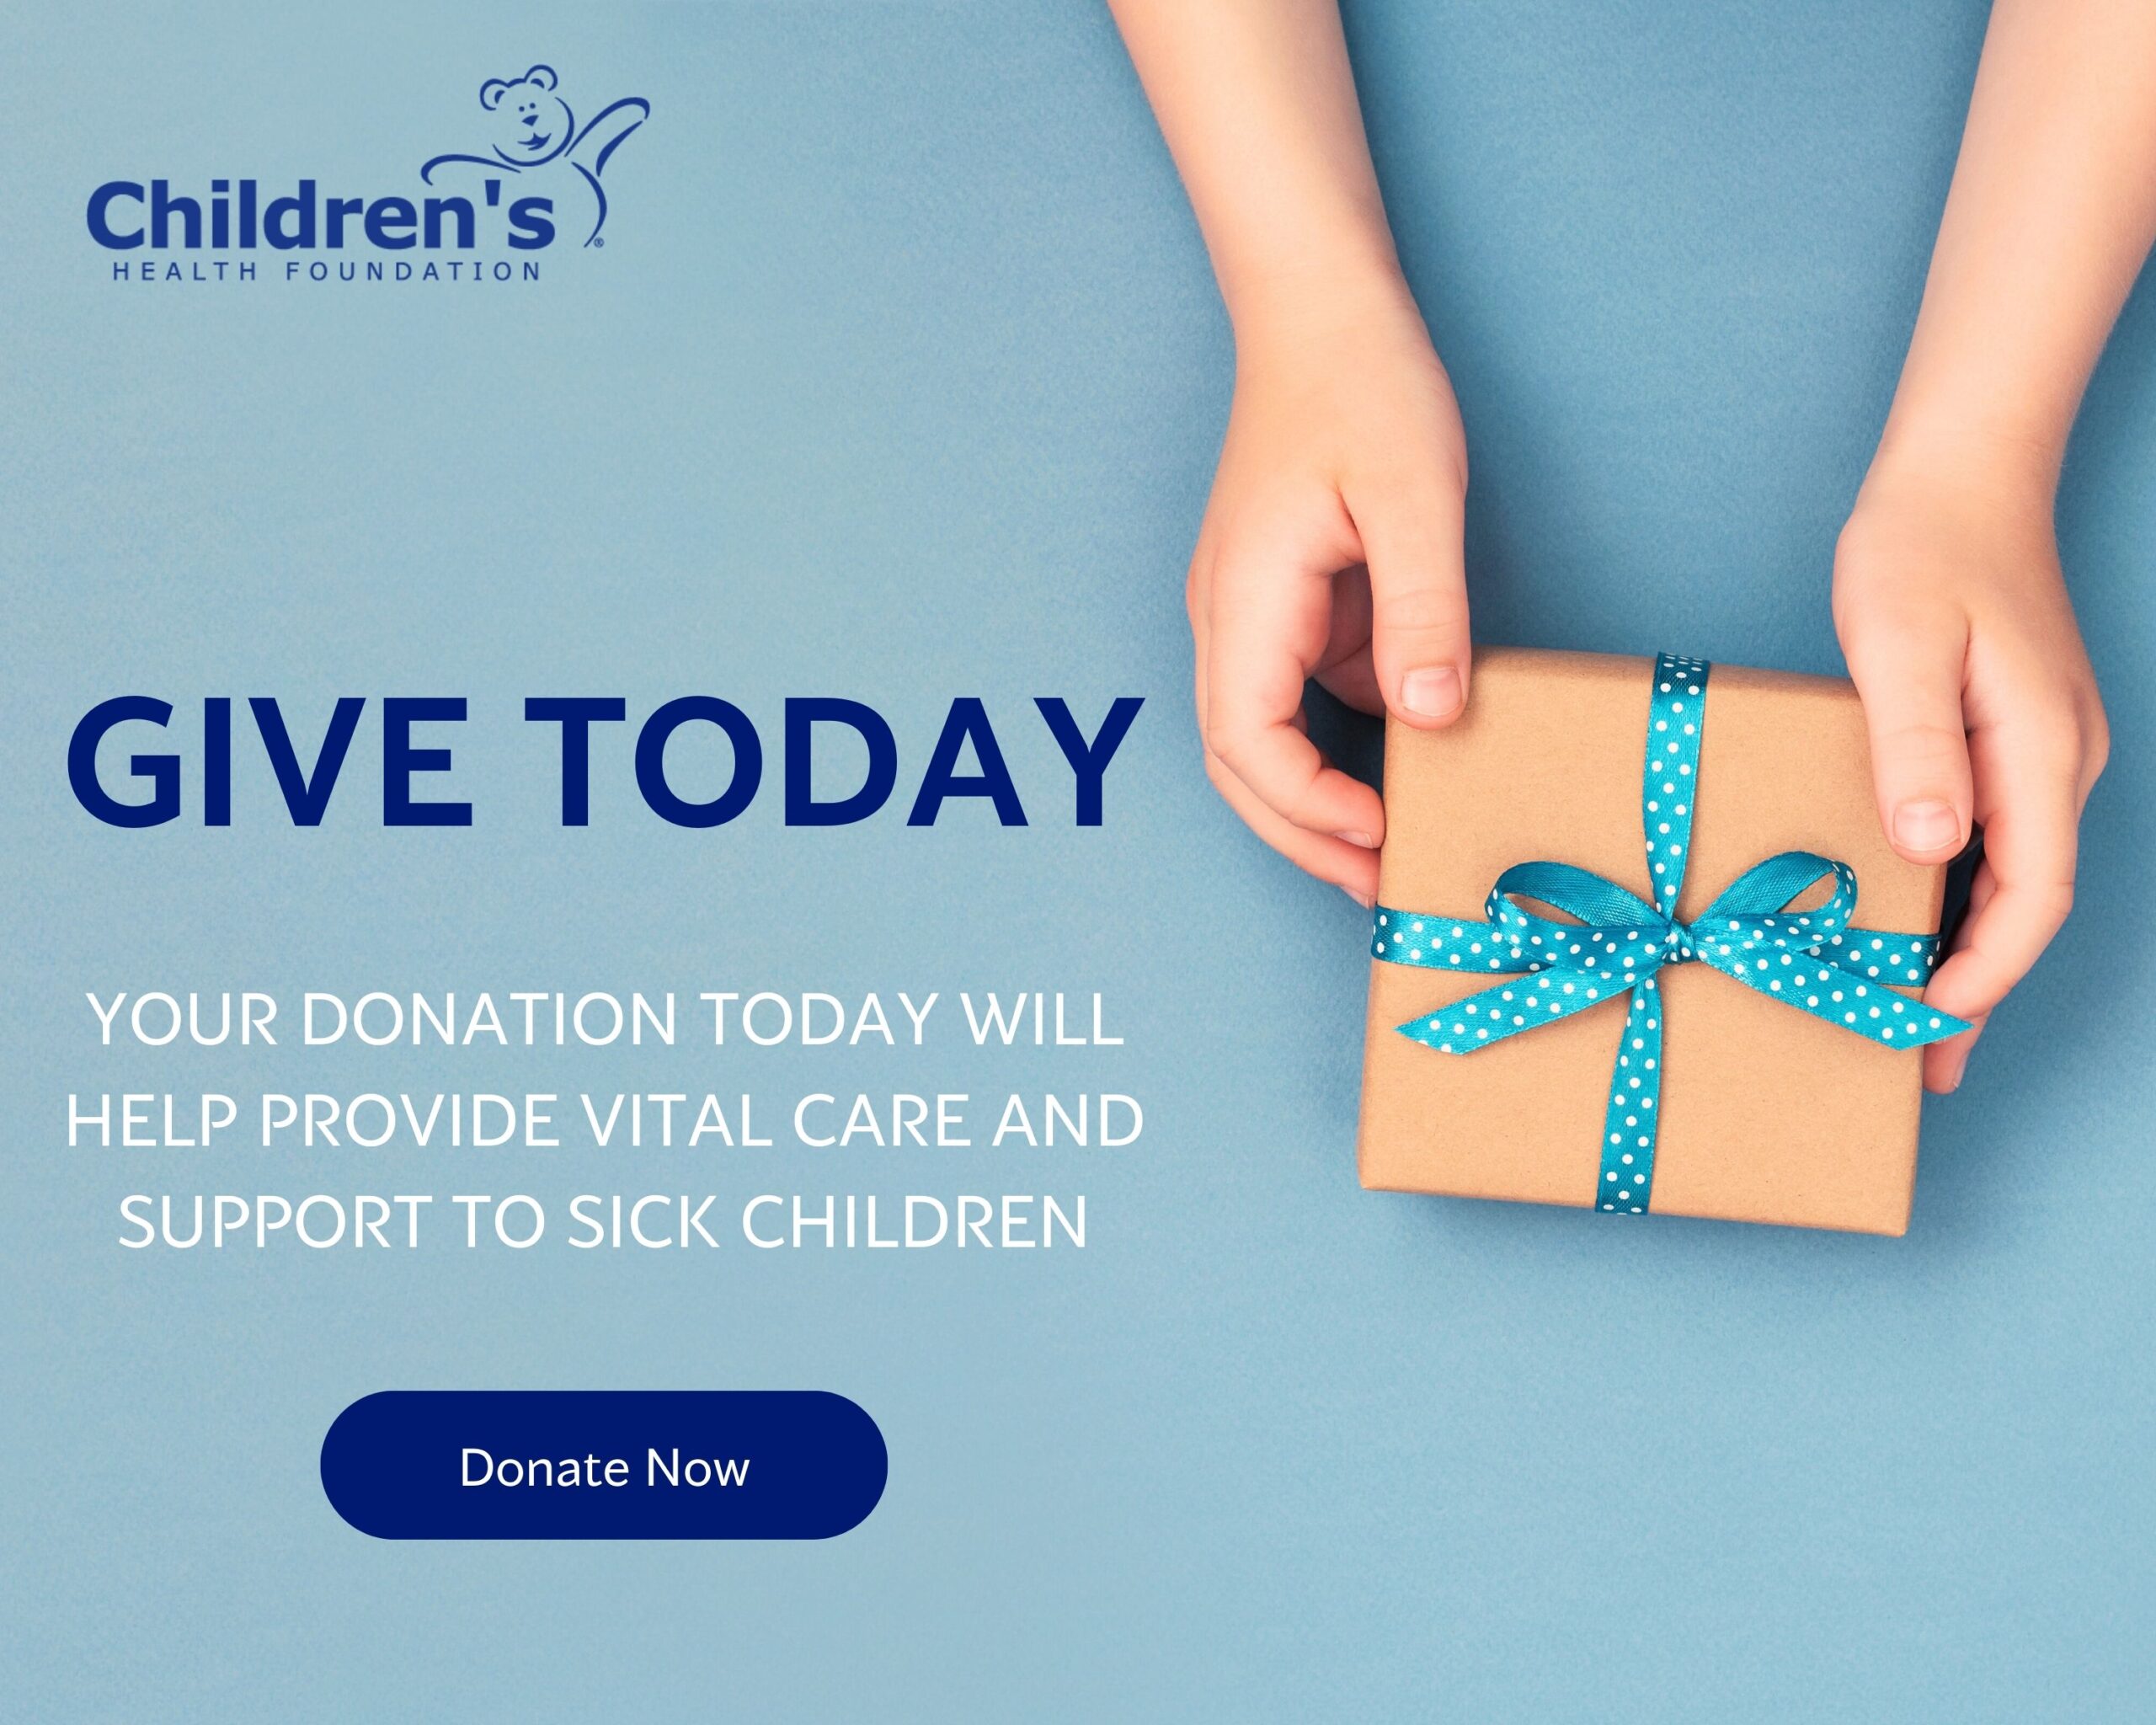 Give Today! Your donation today will provide vital care and support to sick children